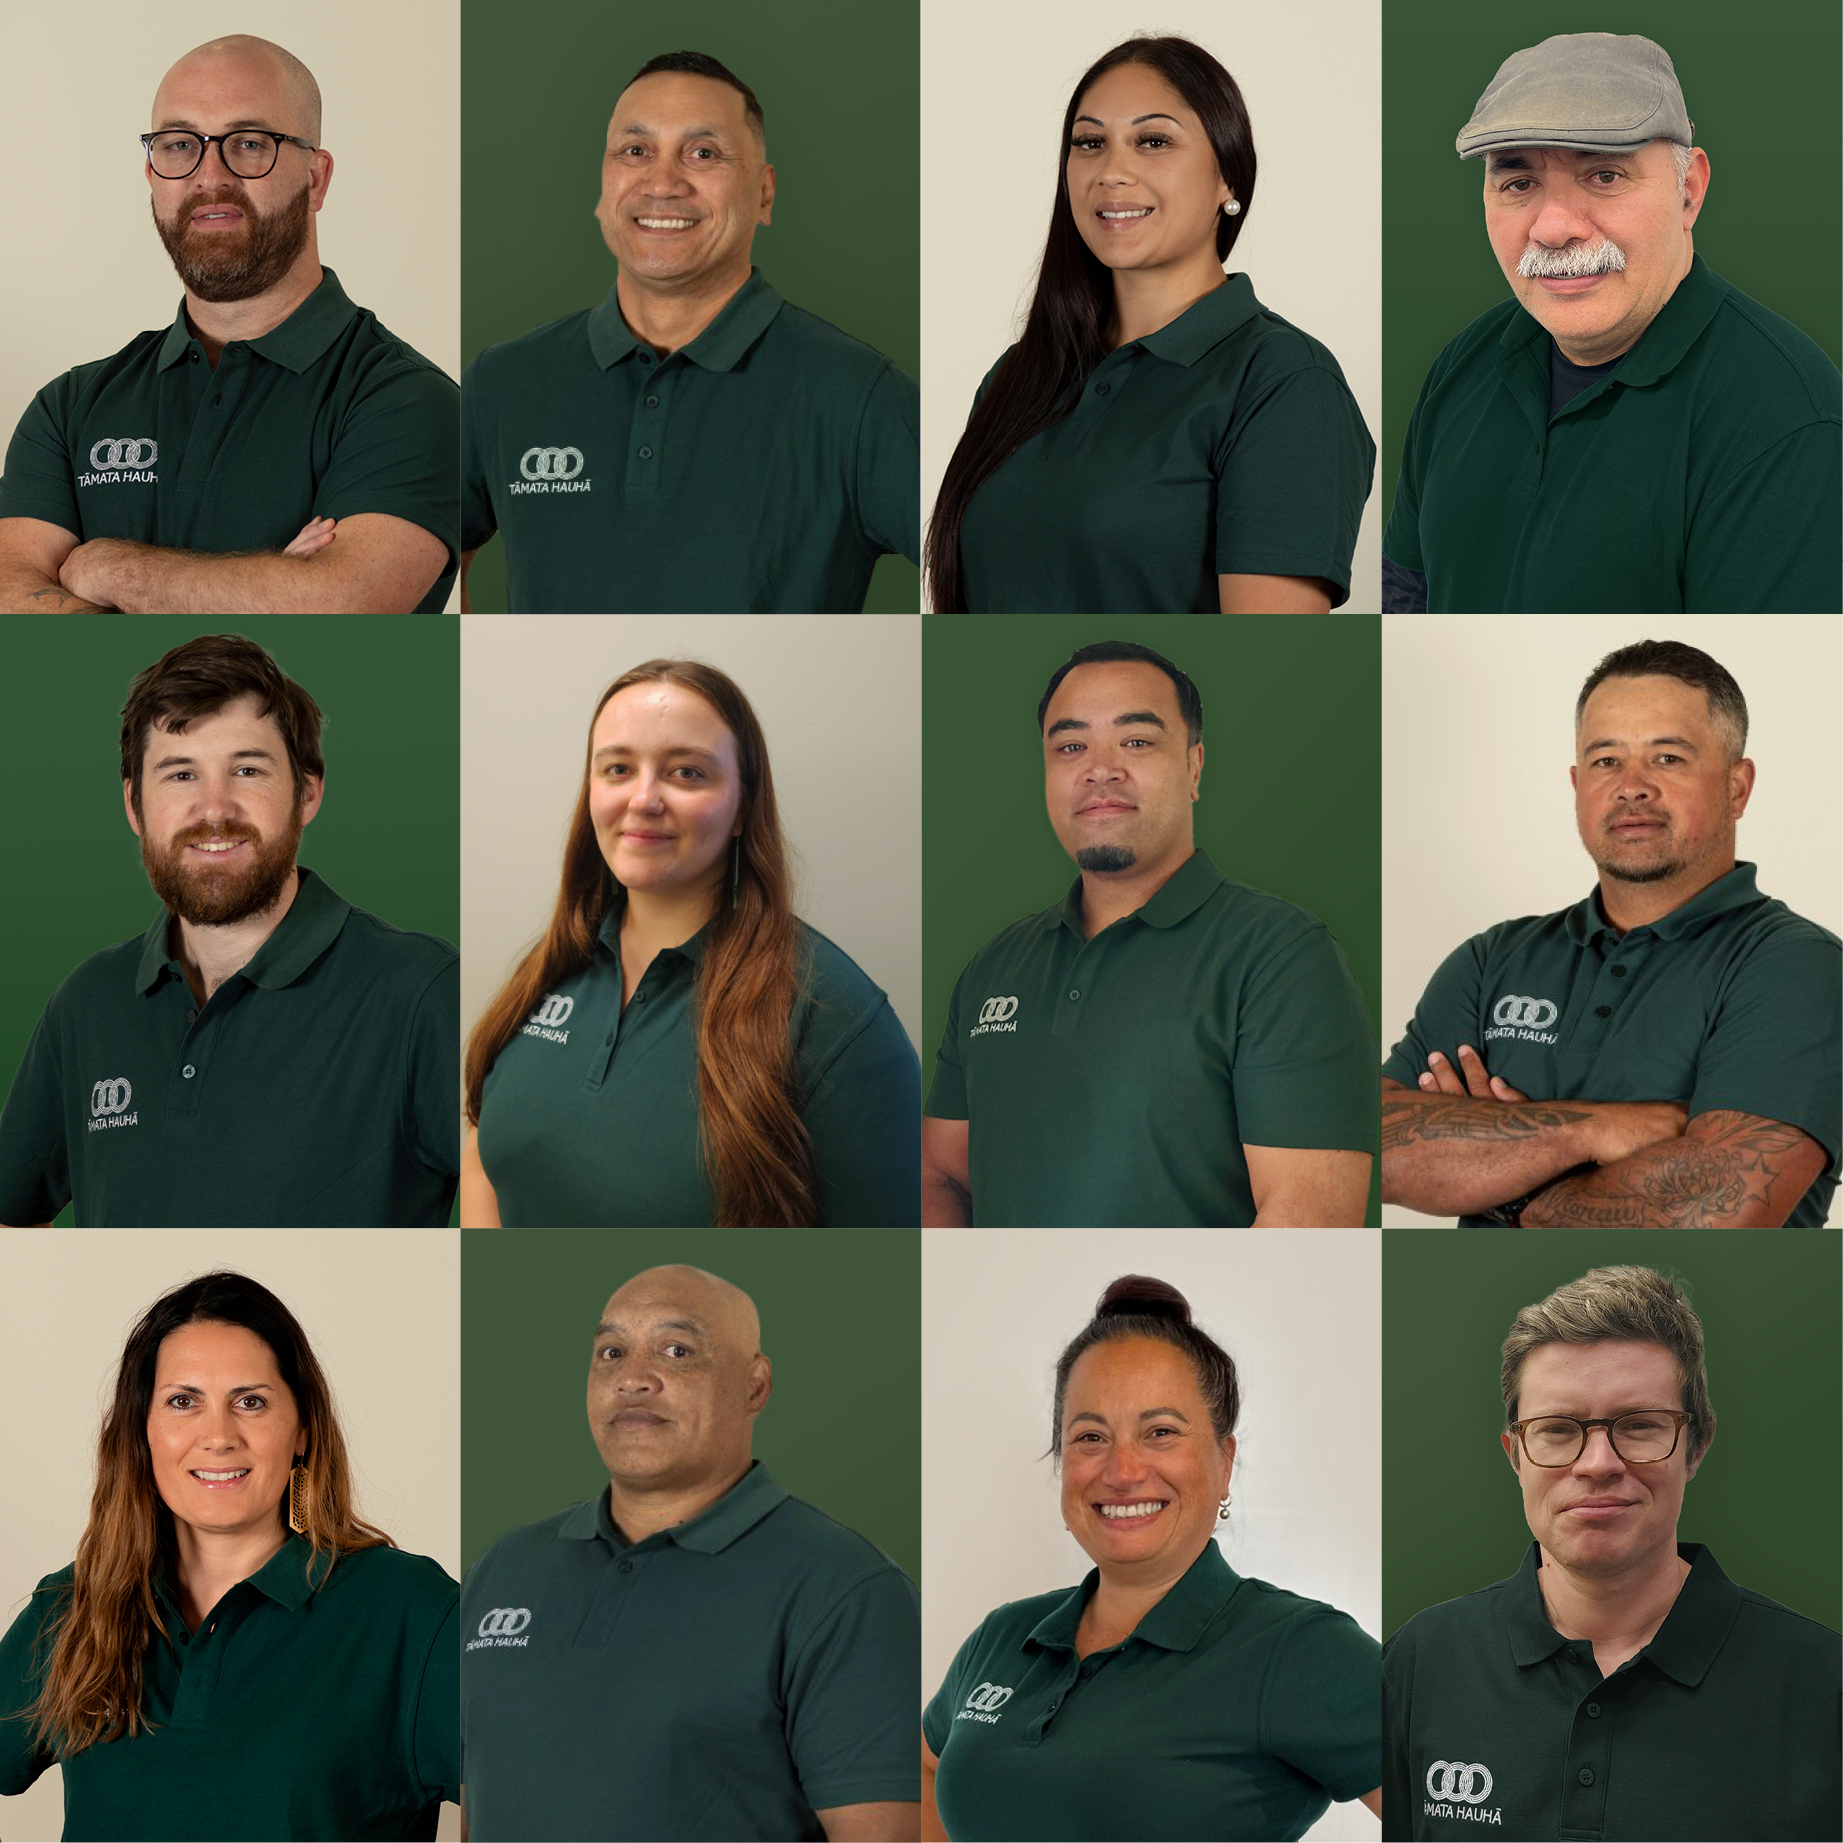 Our staff